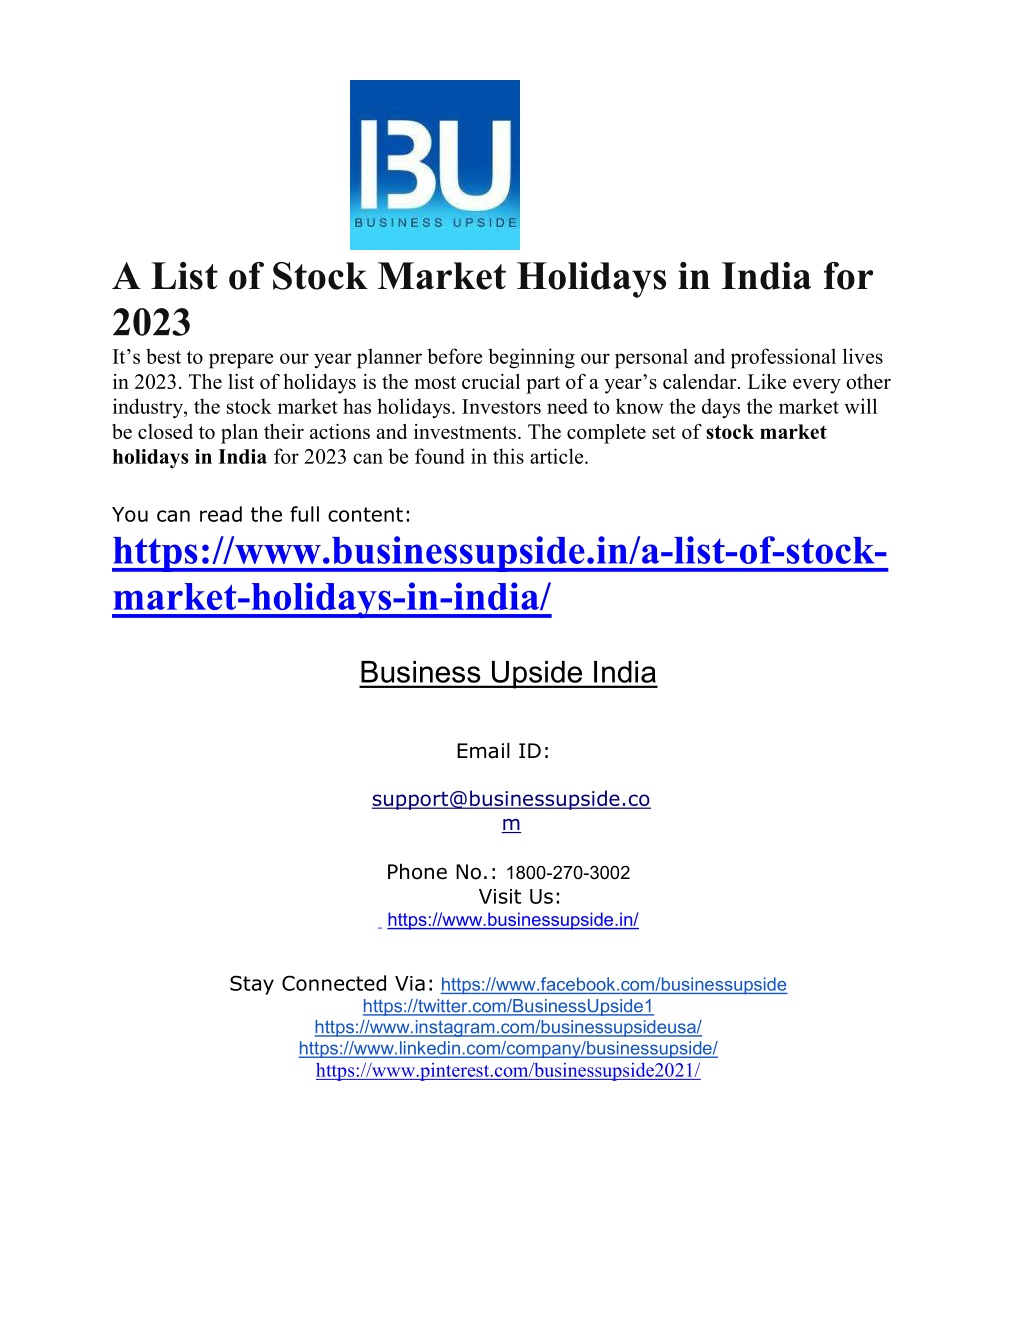 PPT A List of Stock Market Holidays in India for 2023 PowerPoint